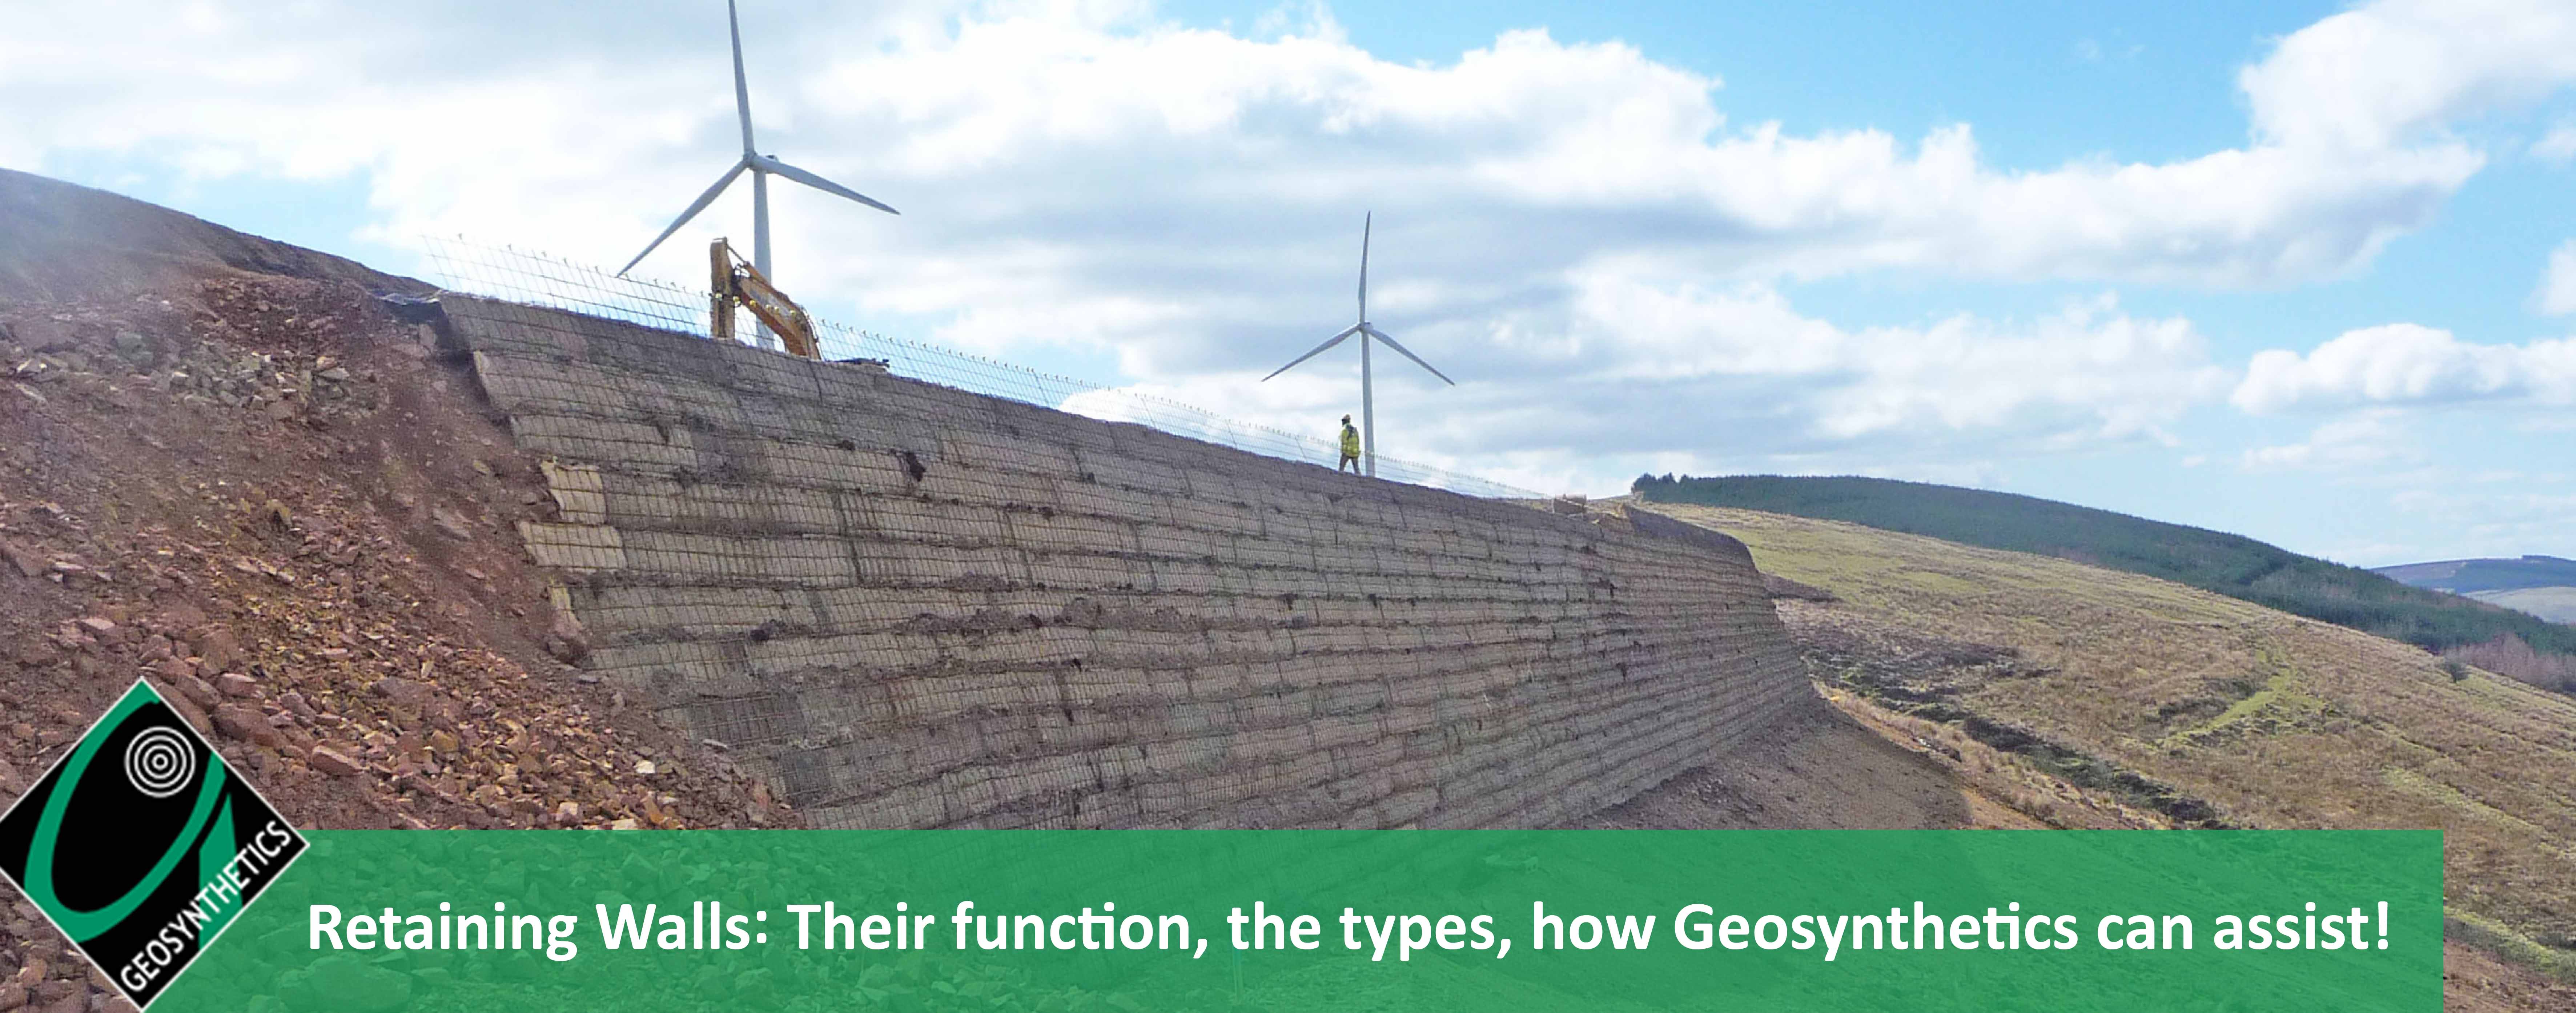 Slope protection, retaining structures, geosynthetics. Tenax